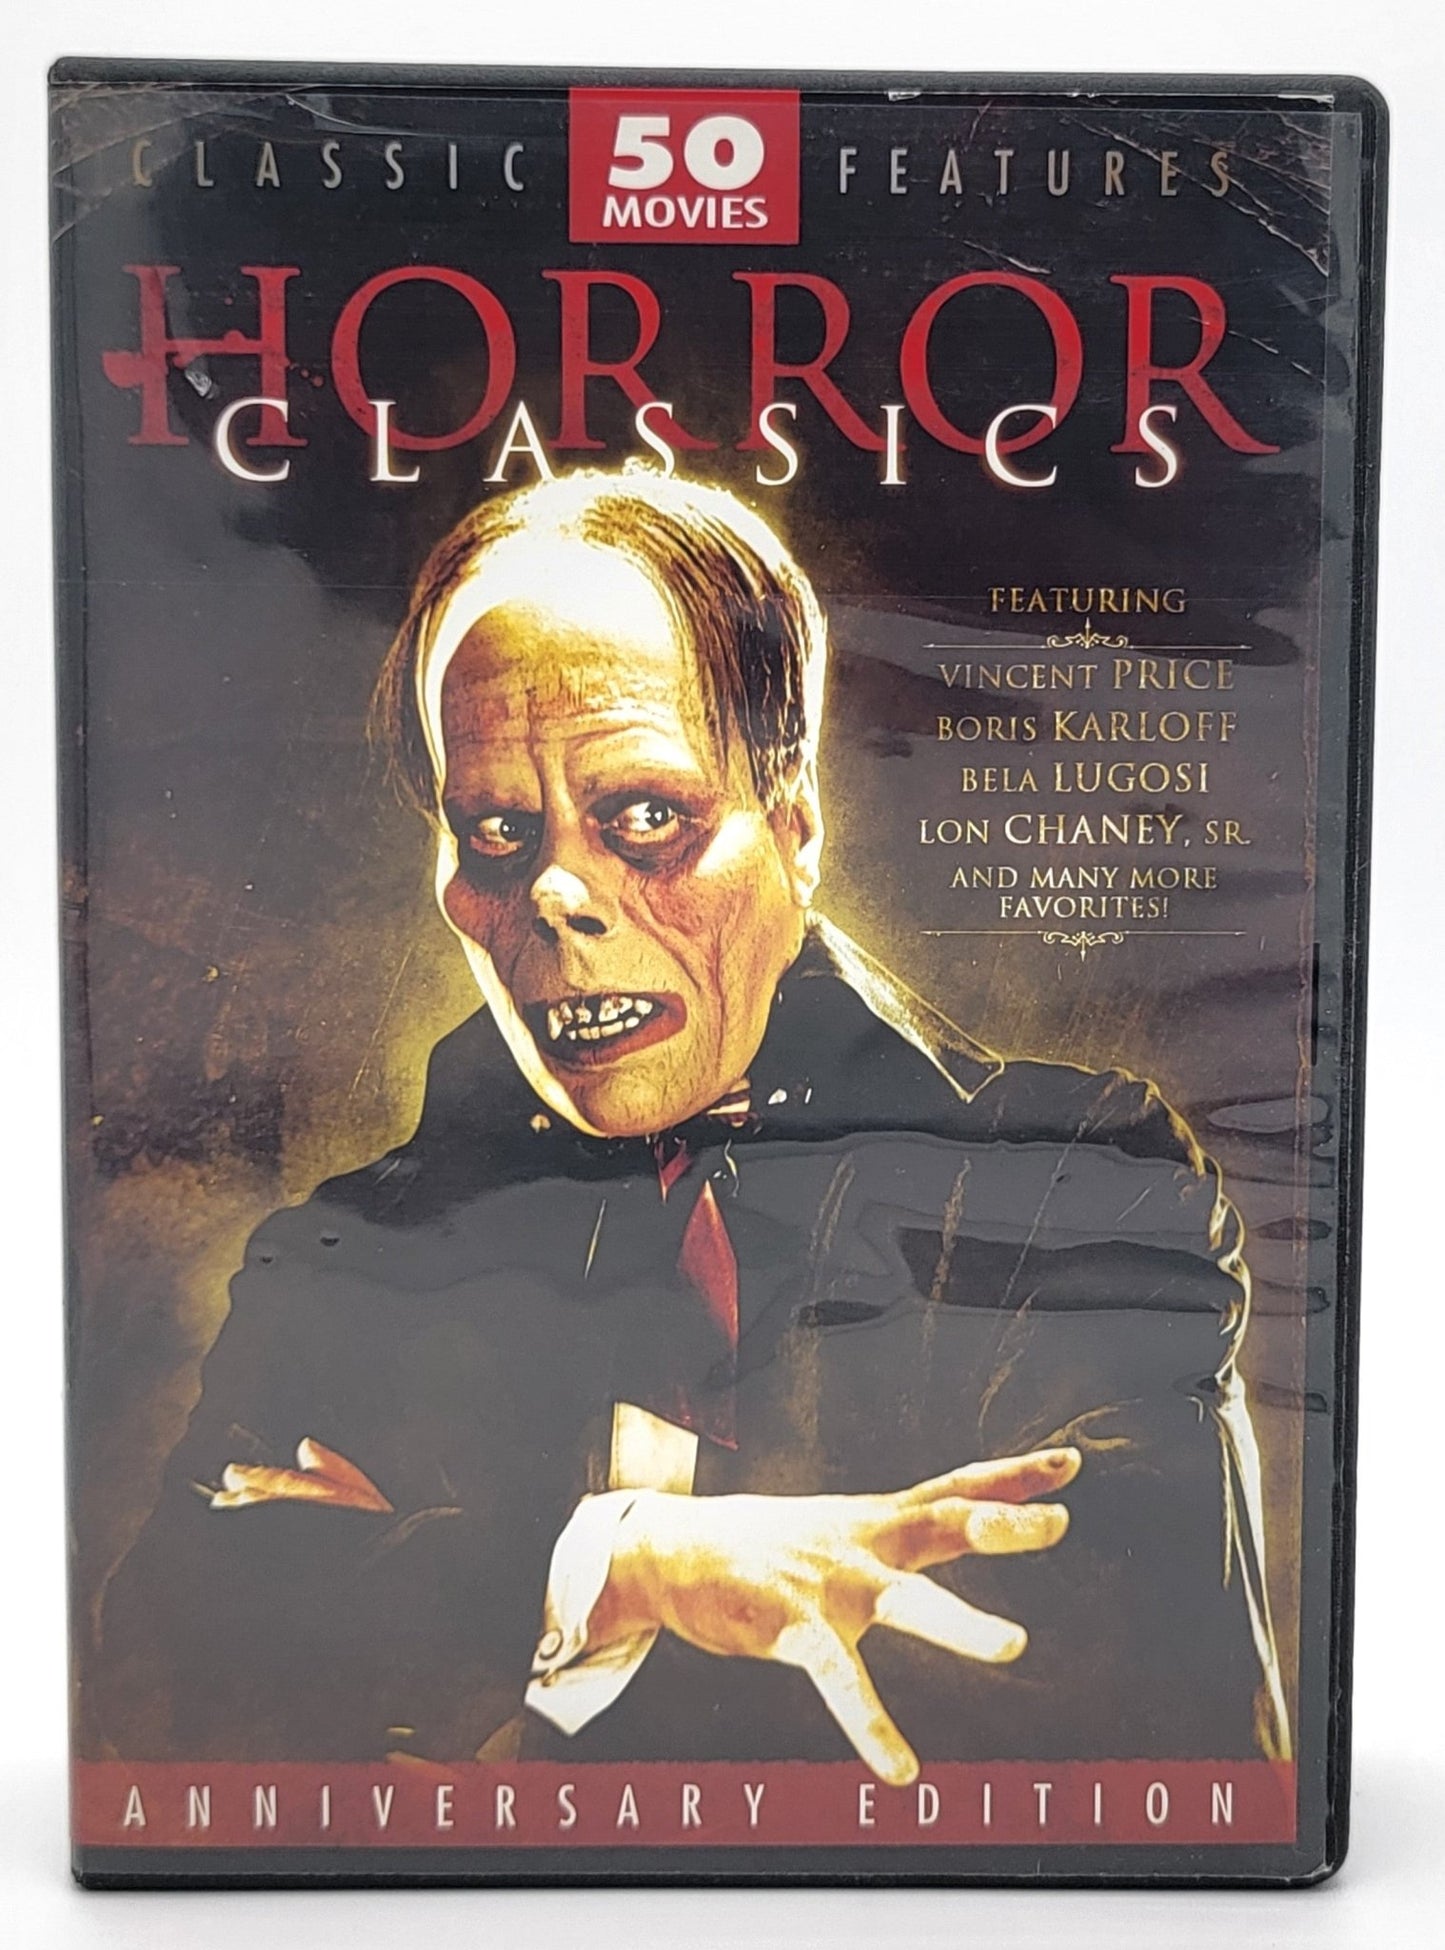 Mill Creek Entertainment - Horror Classics - 50 Movies Anniversary Edition | DVD - Not Rated - 12 Disc Set - DVD - Steady Bunny Shop